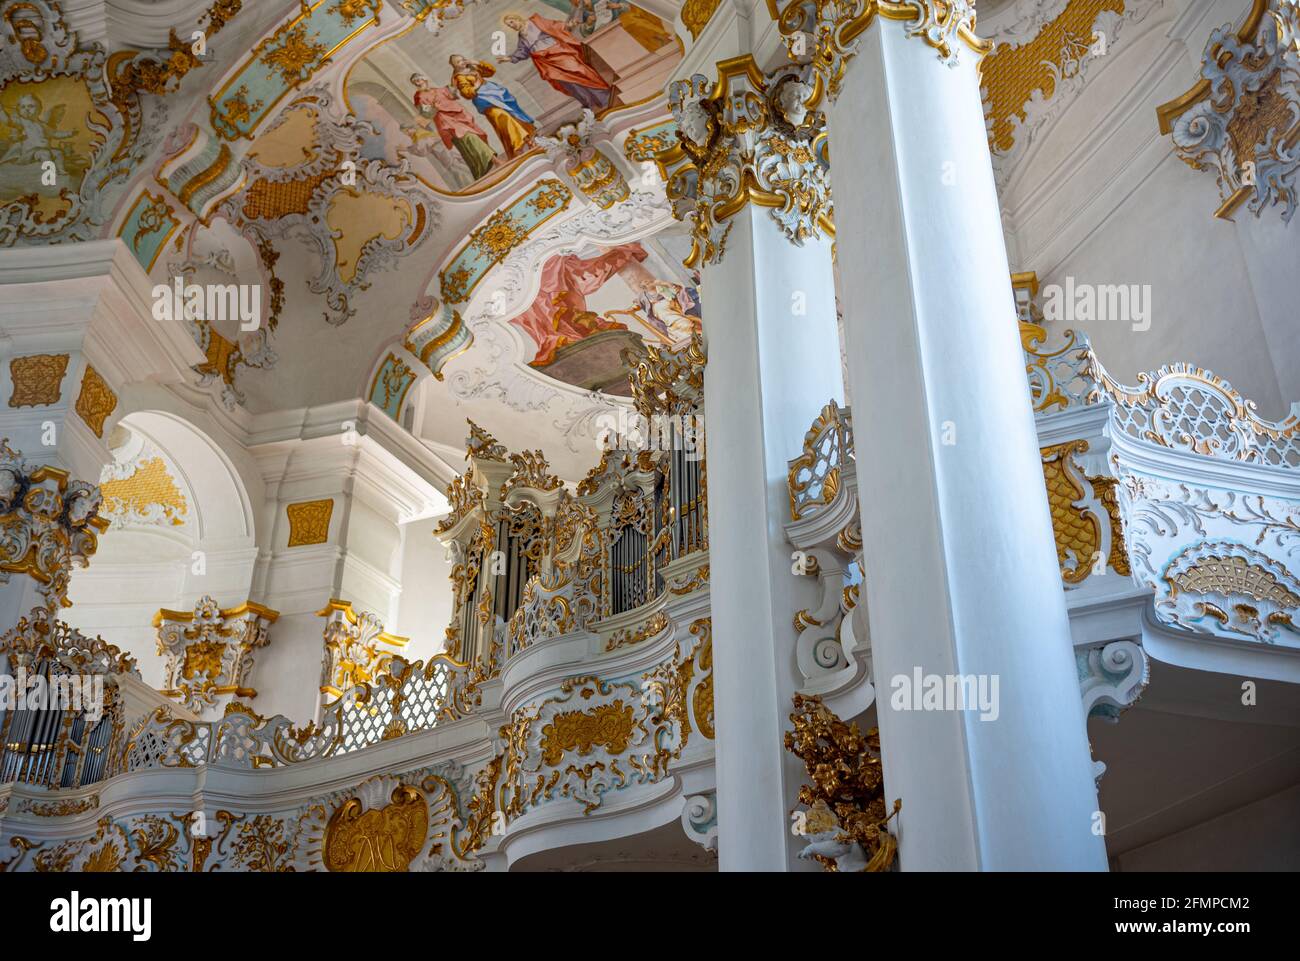 Wies, Germany, Bavarian lander, frescoes and golden decorations in the interor of the Pilgrimage Church of the Scourged Saviour Stock Photo